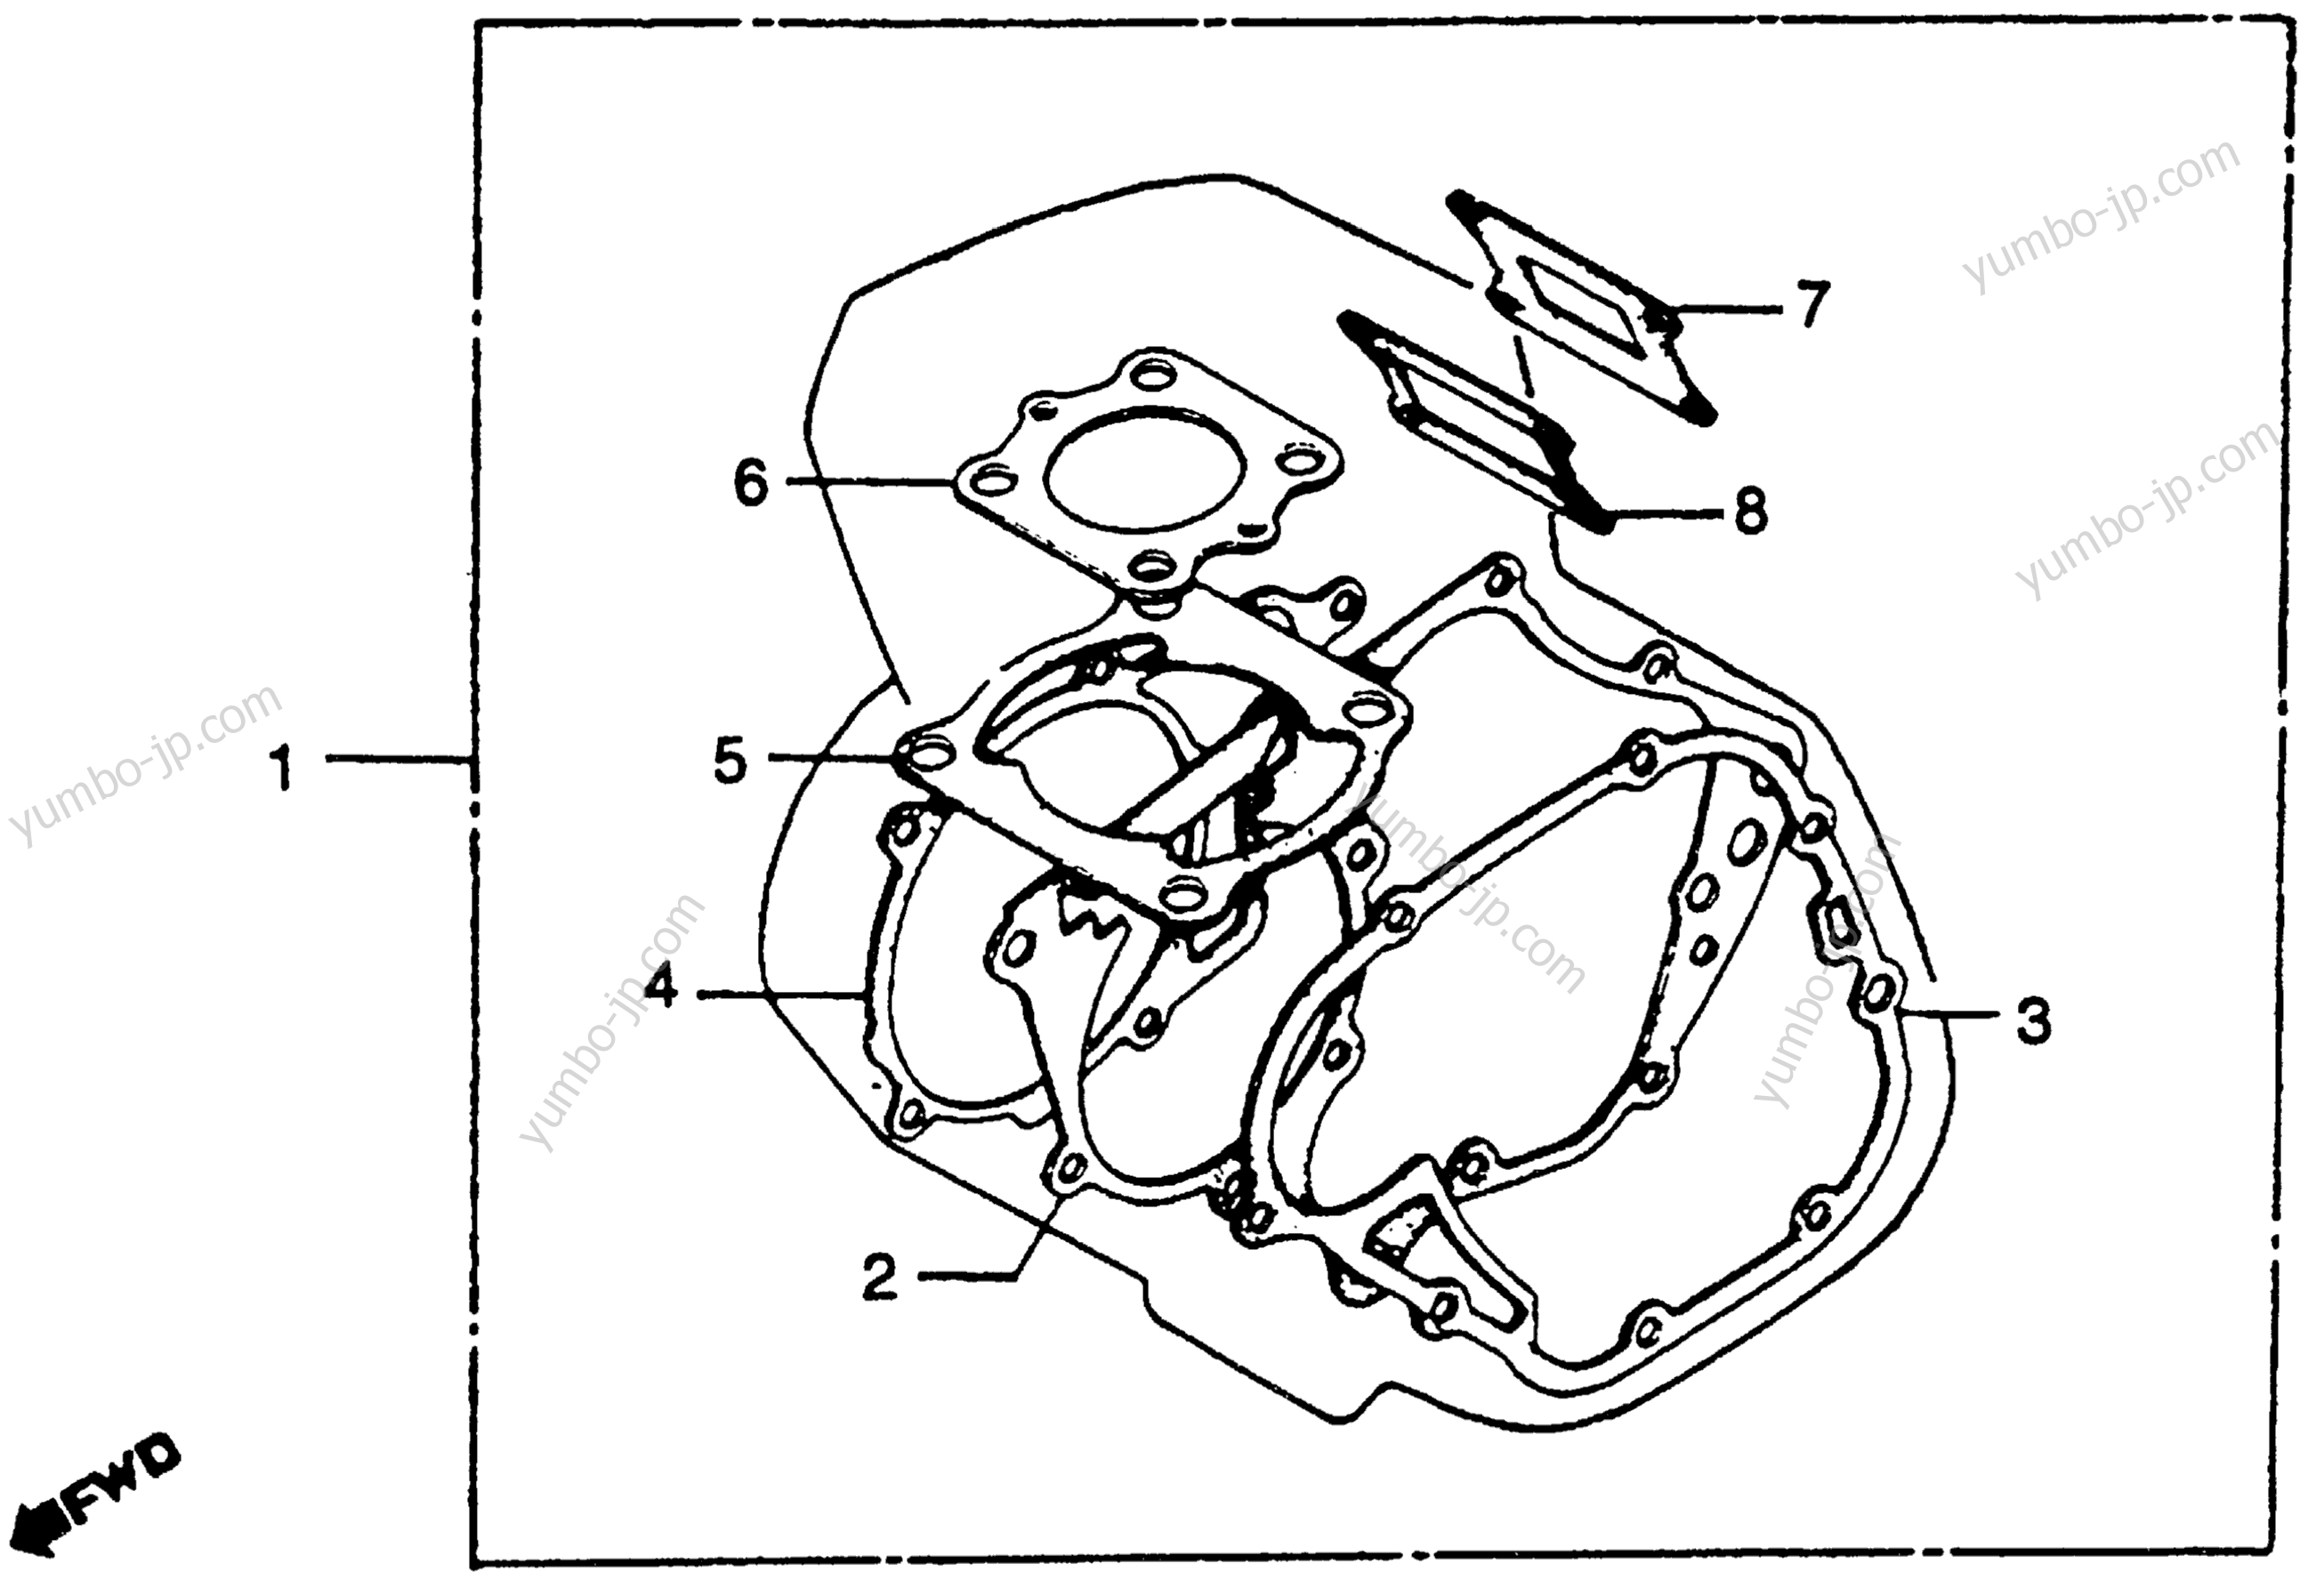 GASKET SET for motorcycles HONDA CR125R A 1980 year